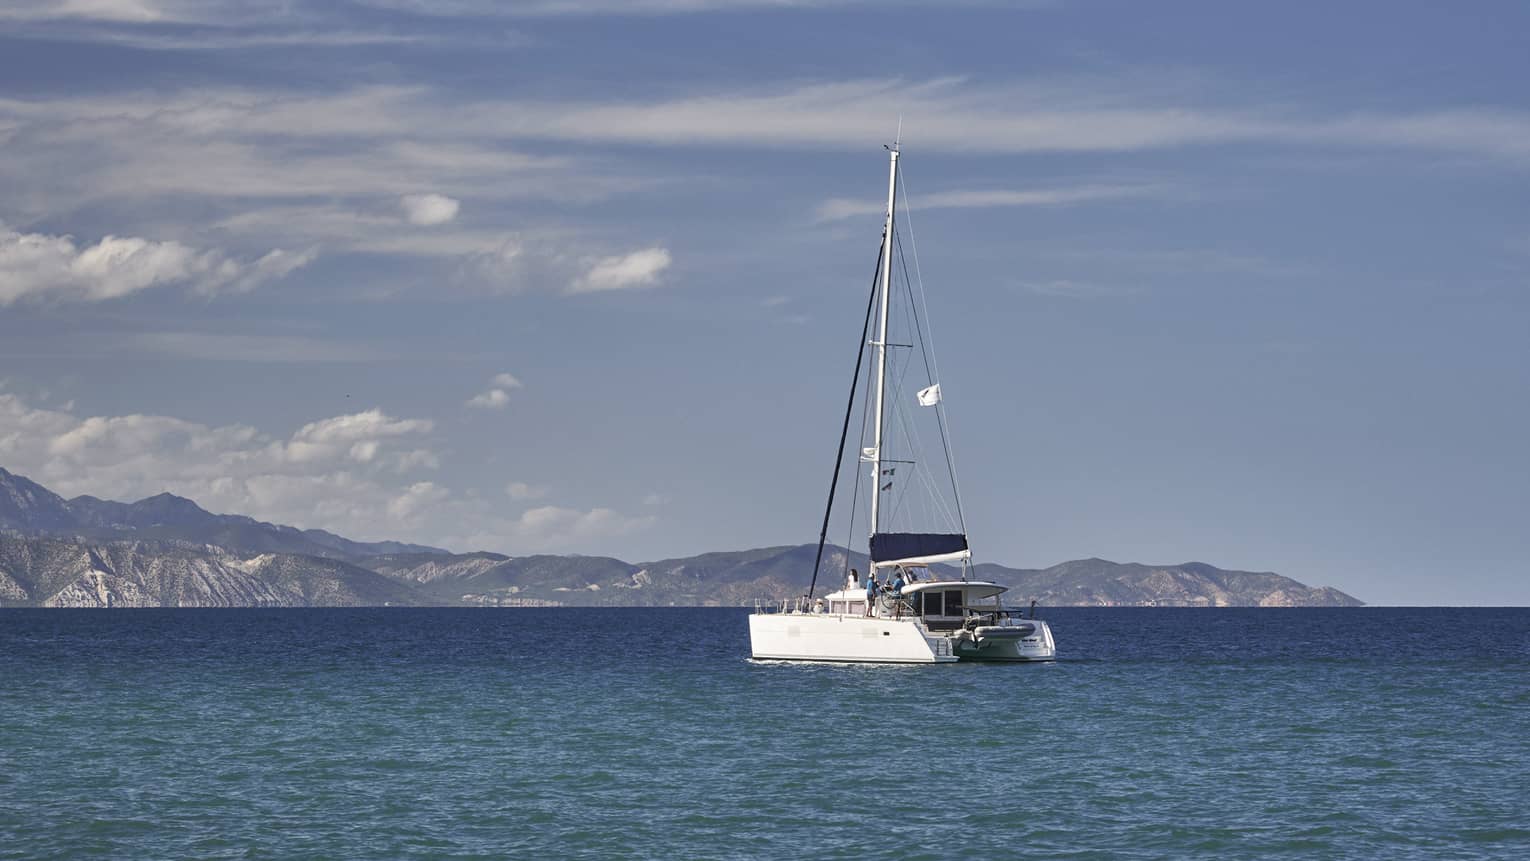 A boat sailing on the ocean with mountains in the distance.